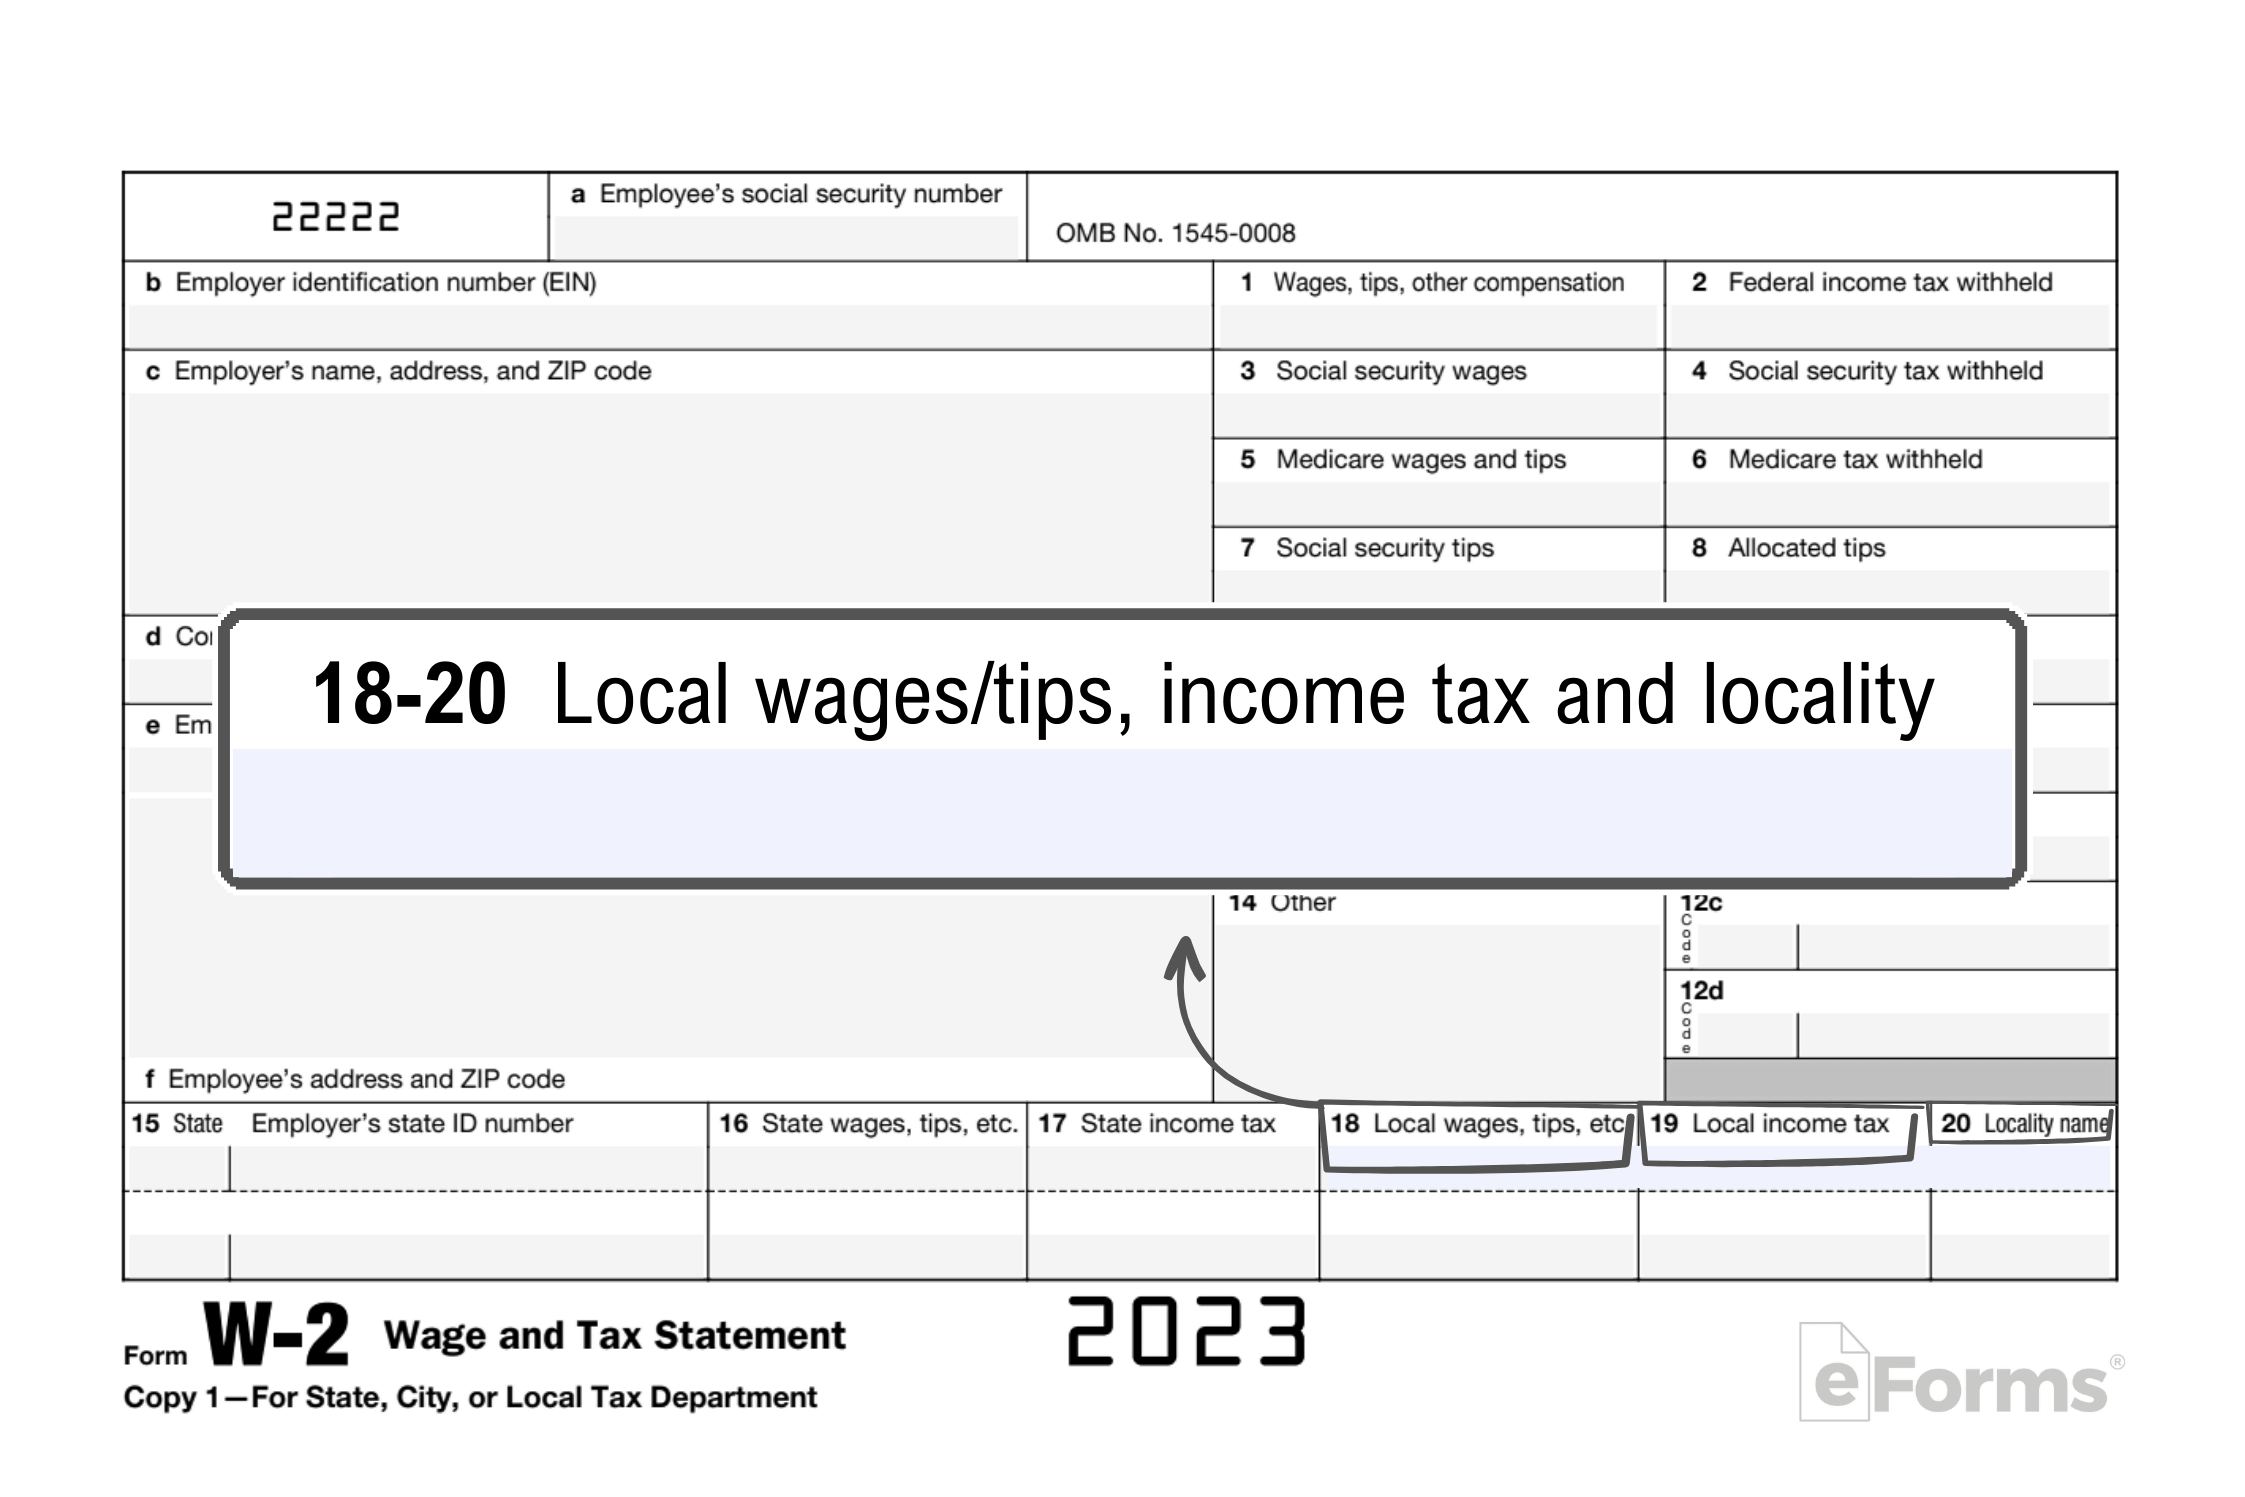 Free Irs Form W-2 | Wage And Tax Statement - Pdf – Eforms for W2 Form Locality Name